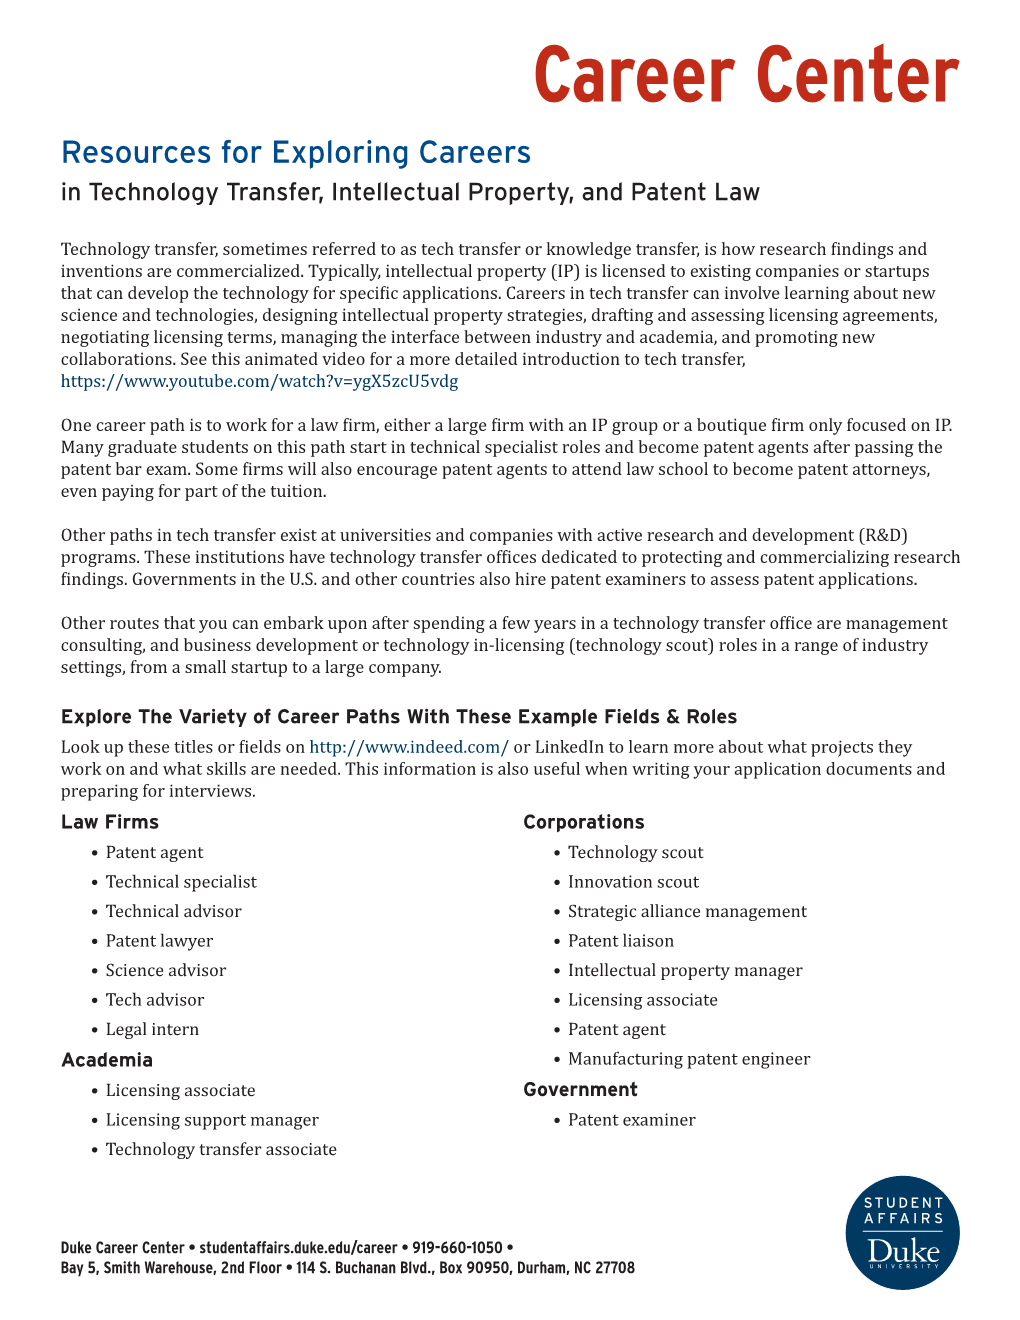 Careers in Intellectual Property and Patent